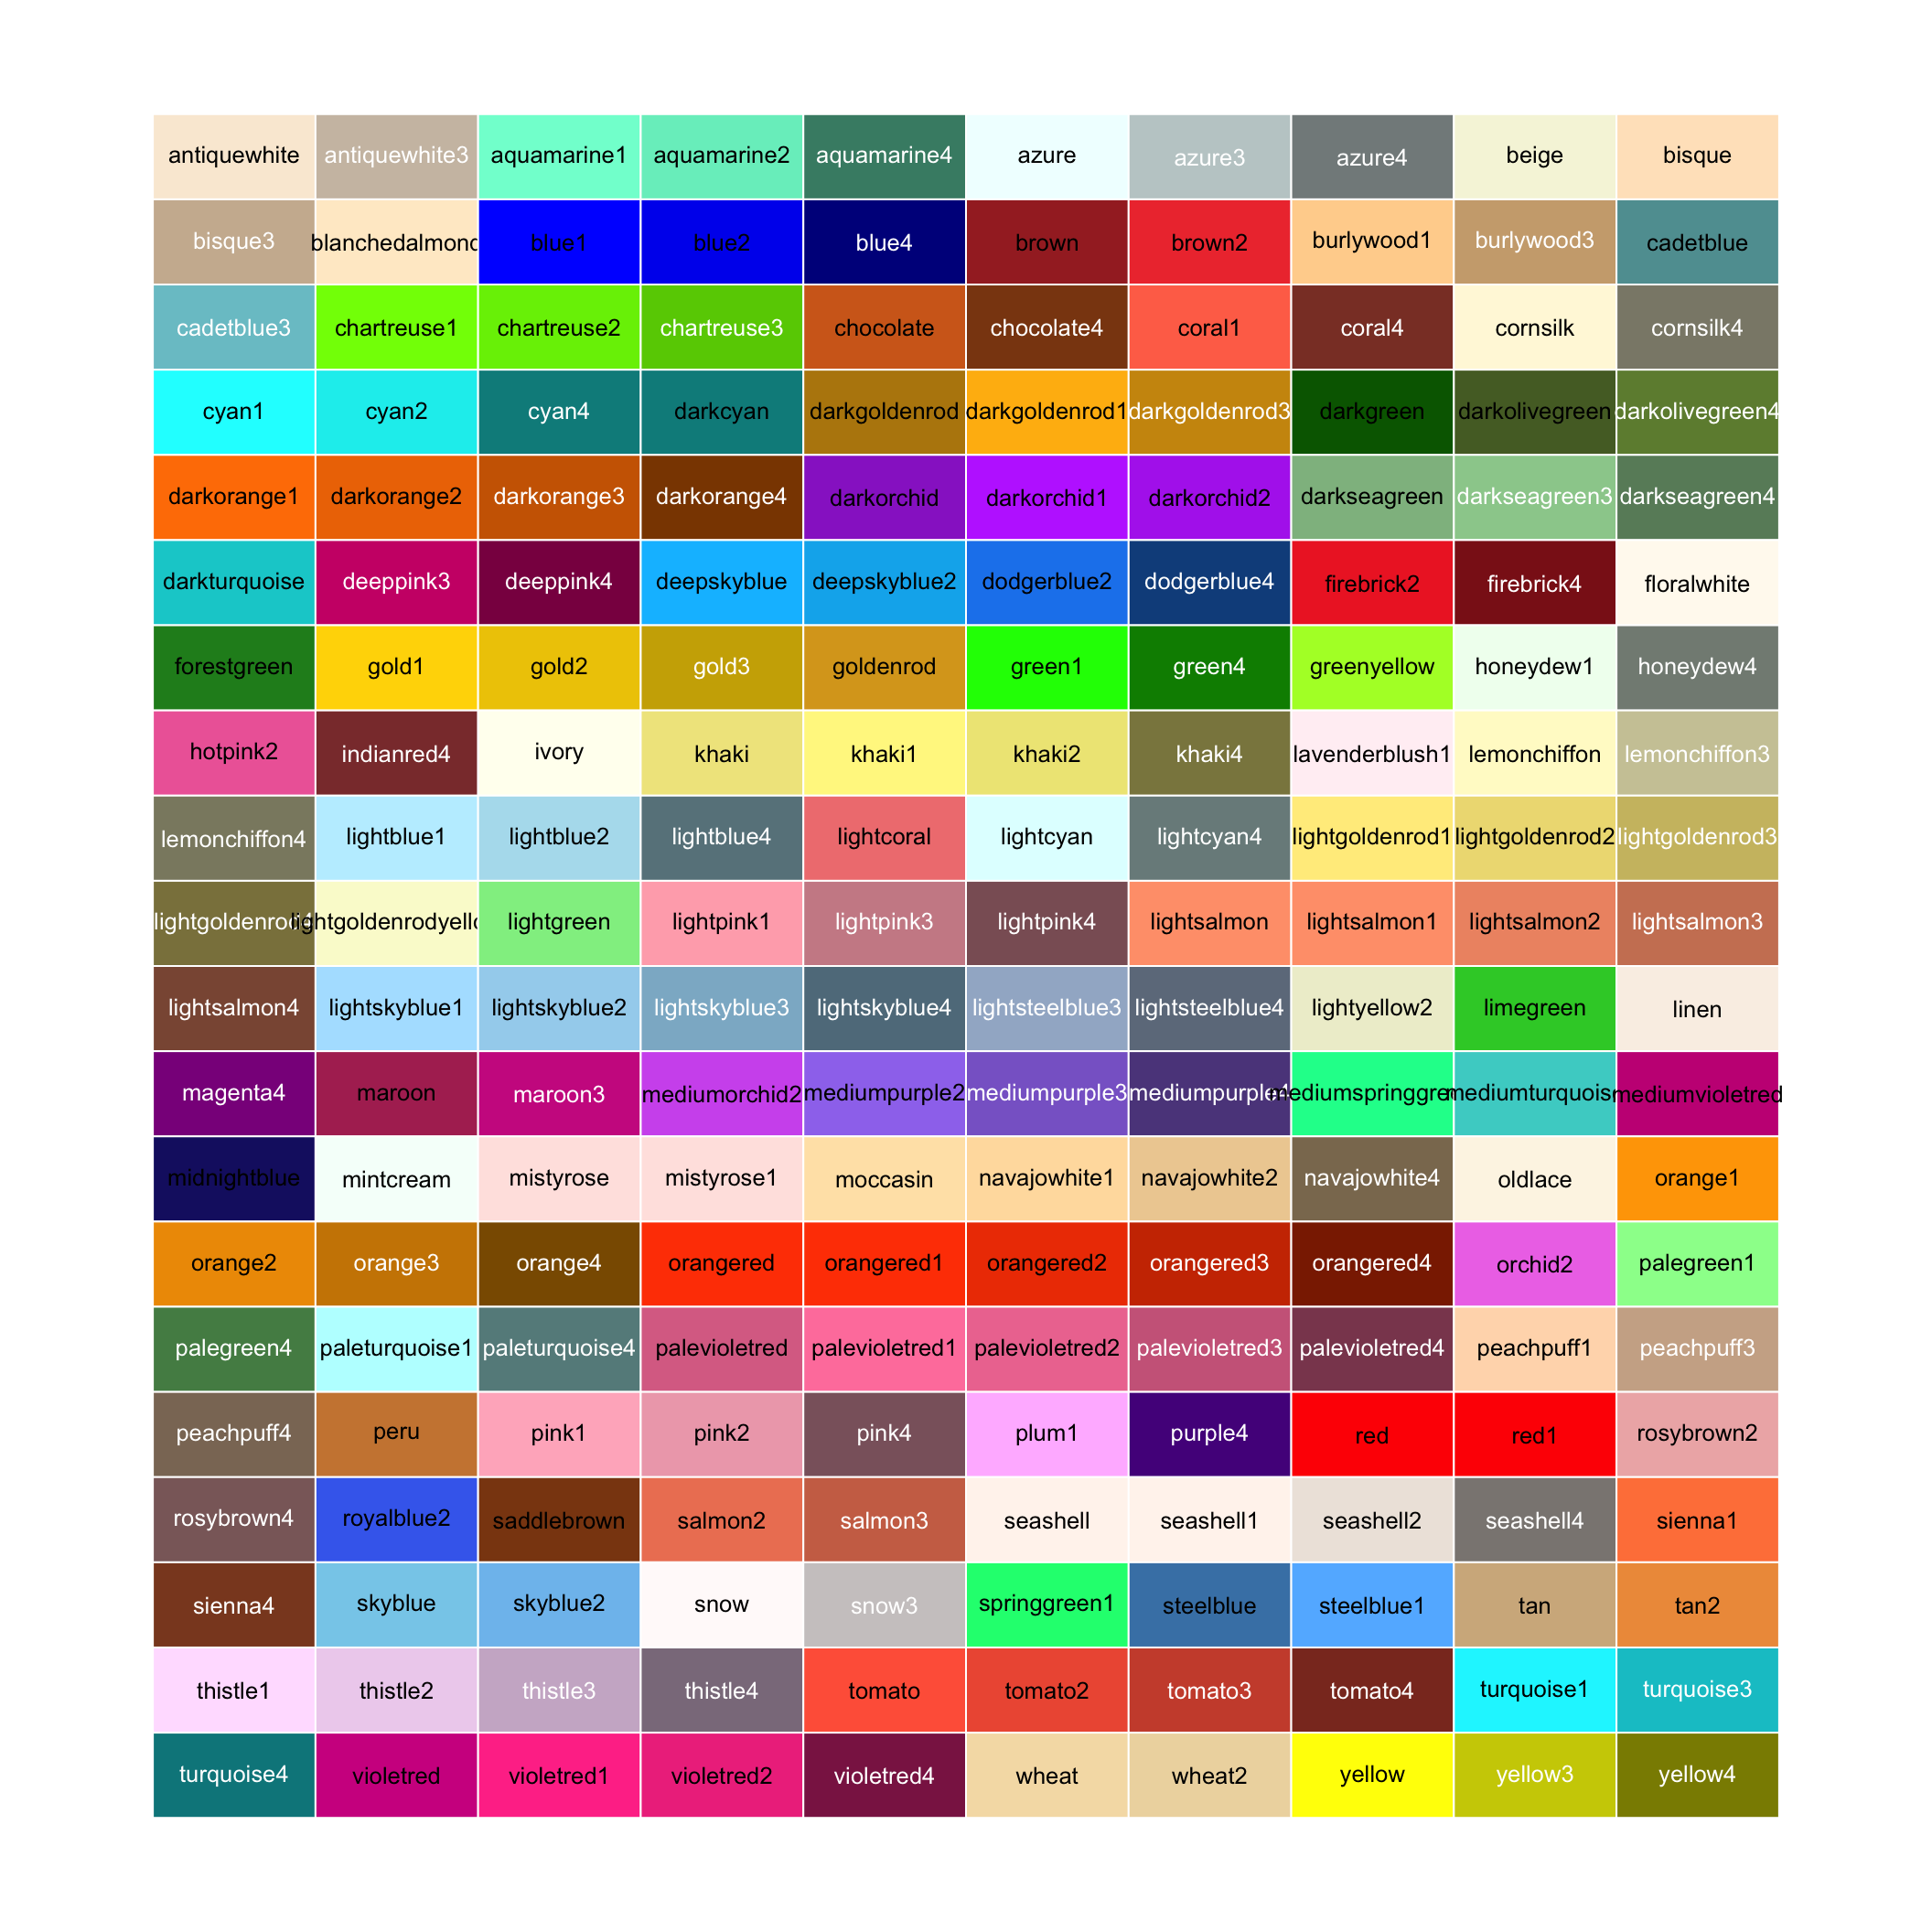 200 random (non-gray) colors (from colors()) and their names in R.